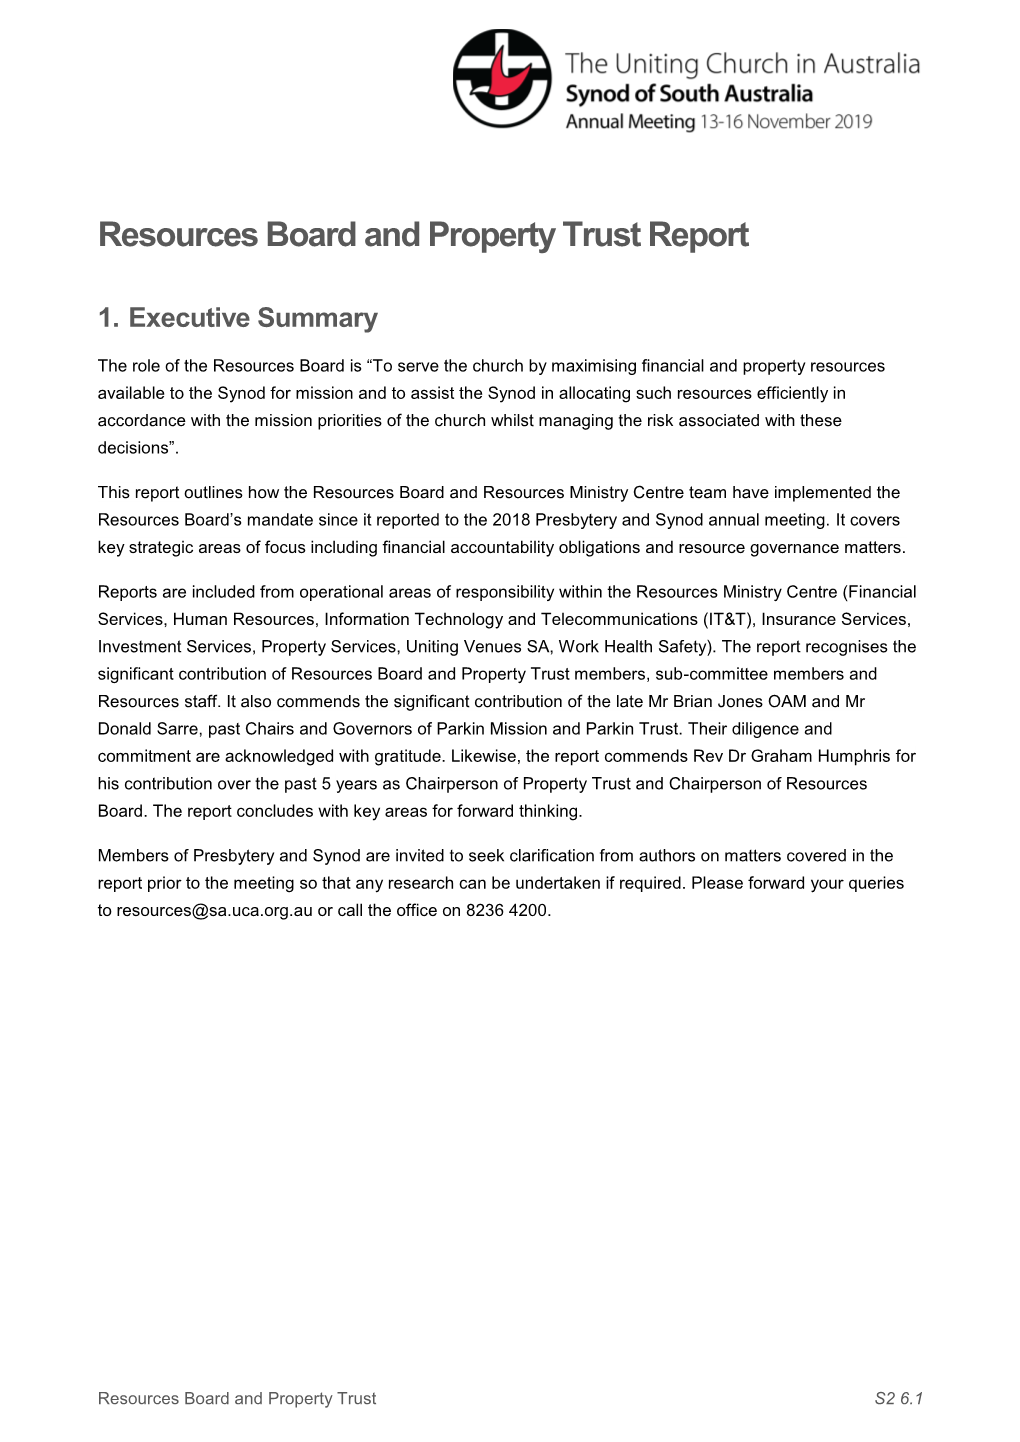 Resources Board and Property Trust Report